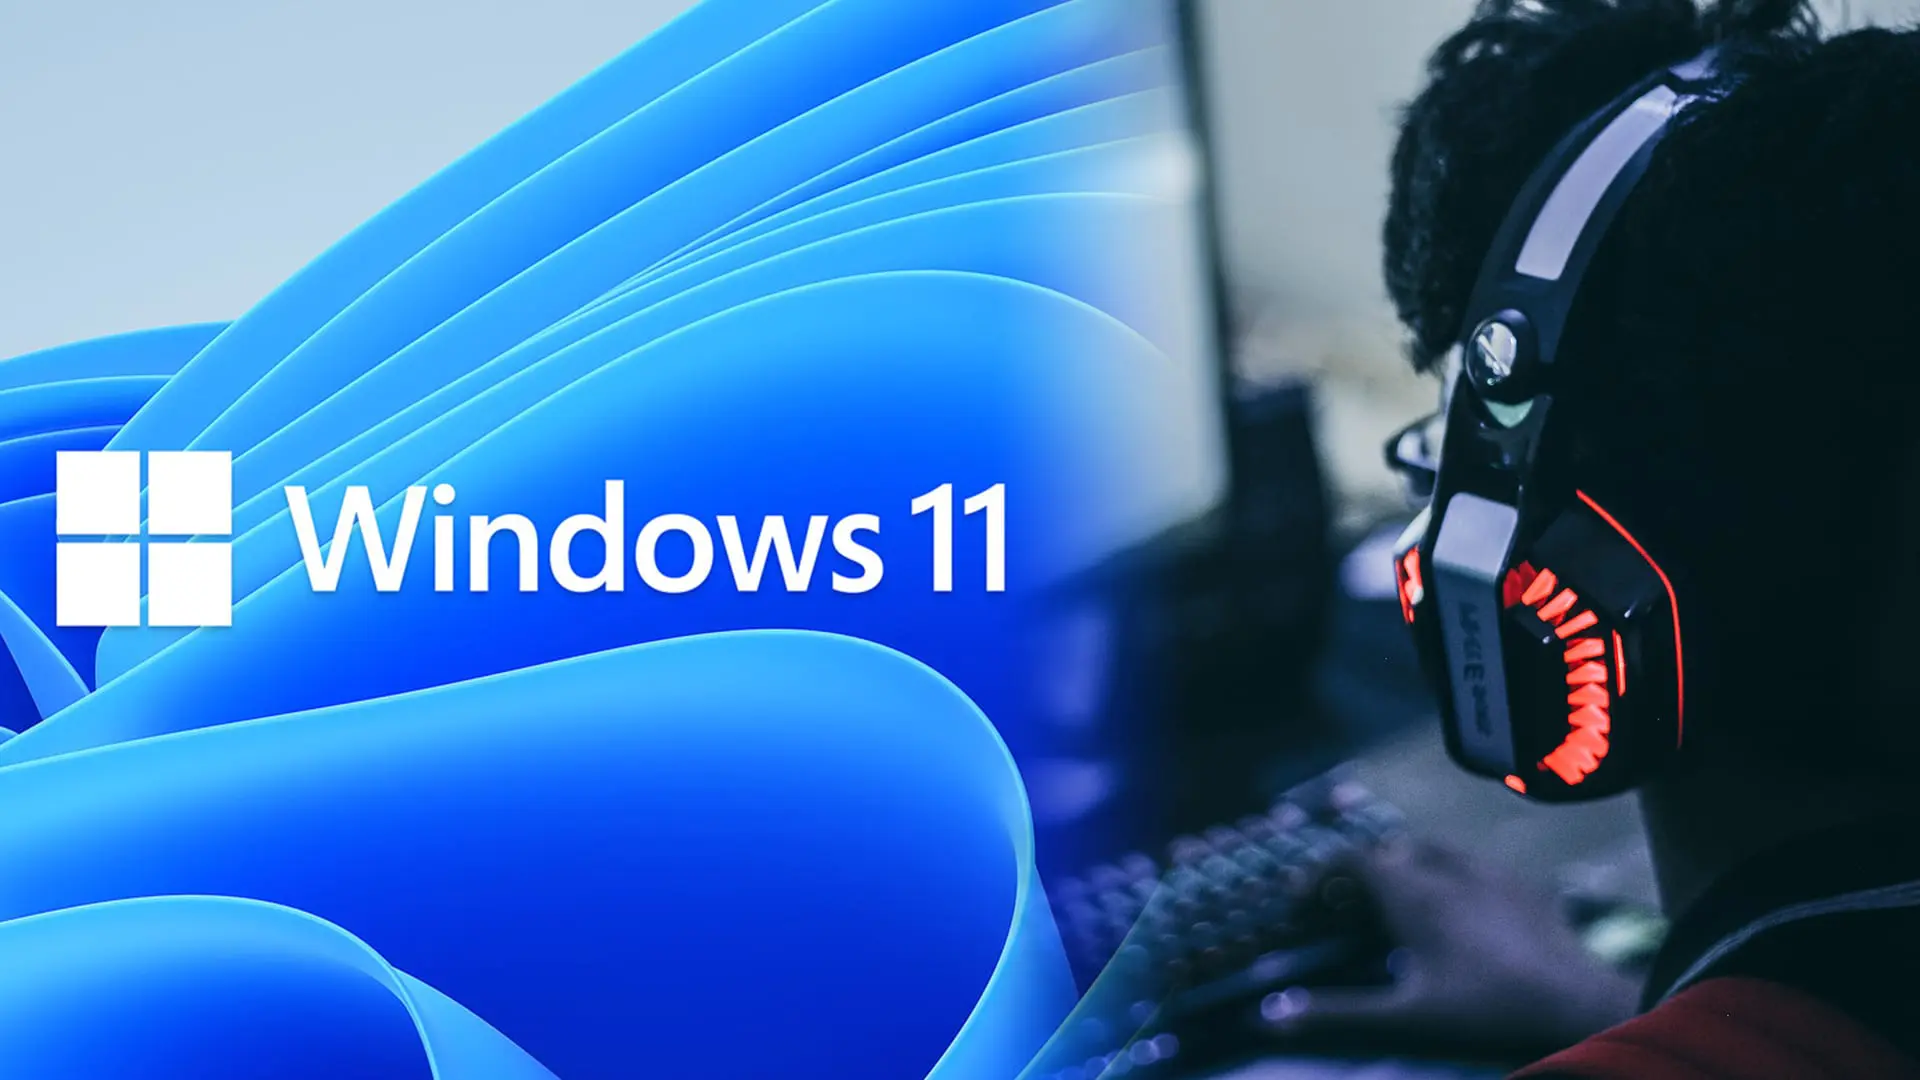 Microsoft removes Windows 11 22H2 safeguard hold related to problematic games, apps